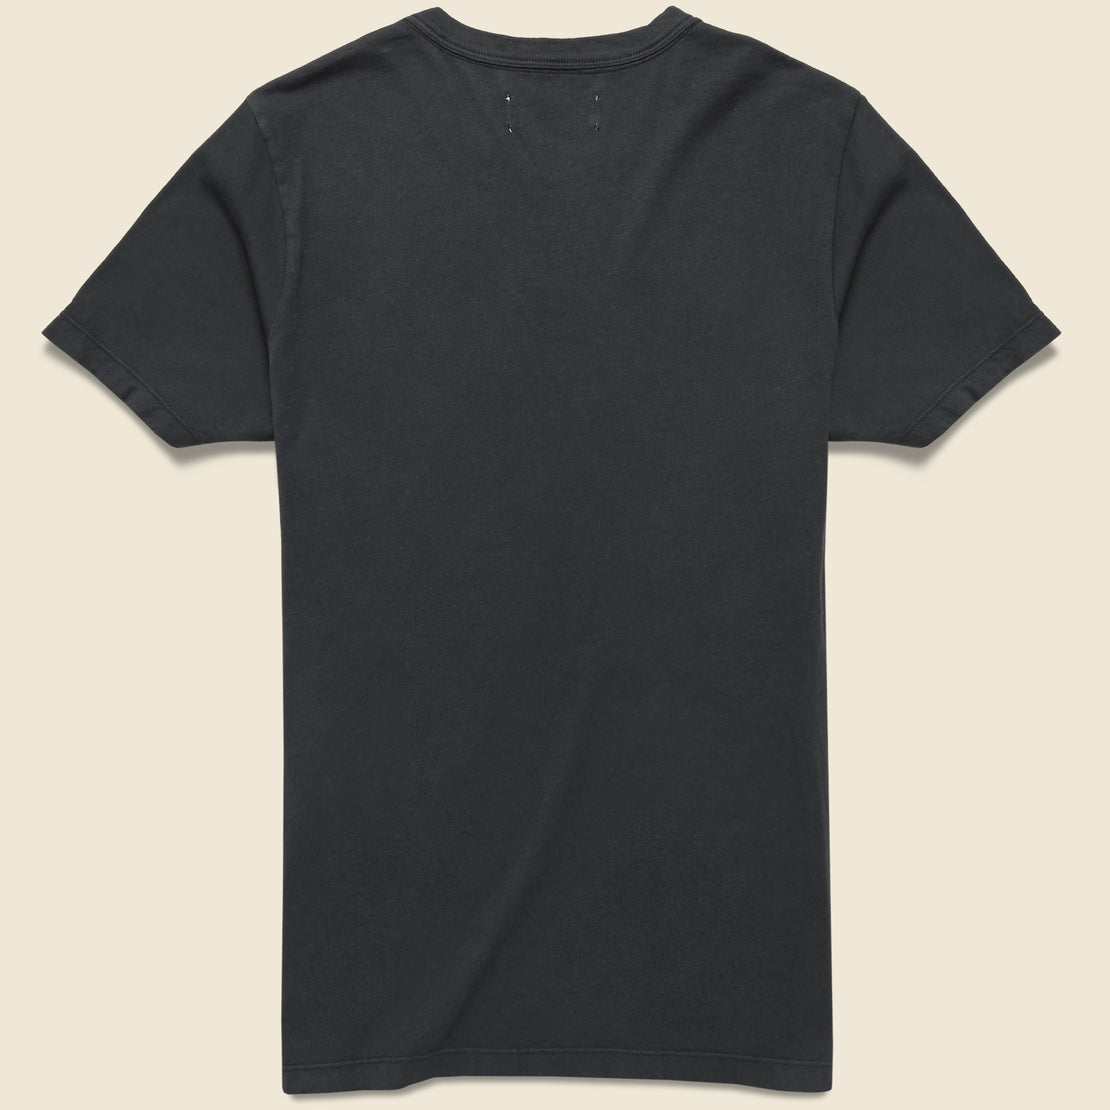 High Plains Drifter Tee - Black - Imogene + Willie - STAG Provisions - Tops - S/S Tee - Graphic